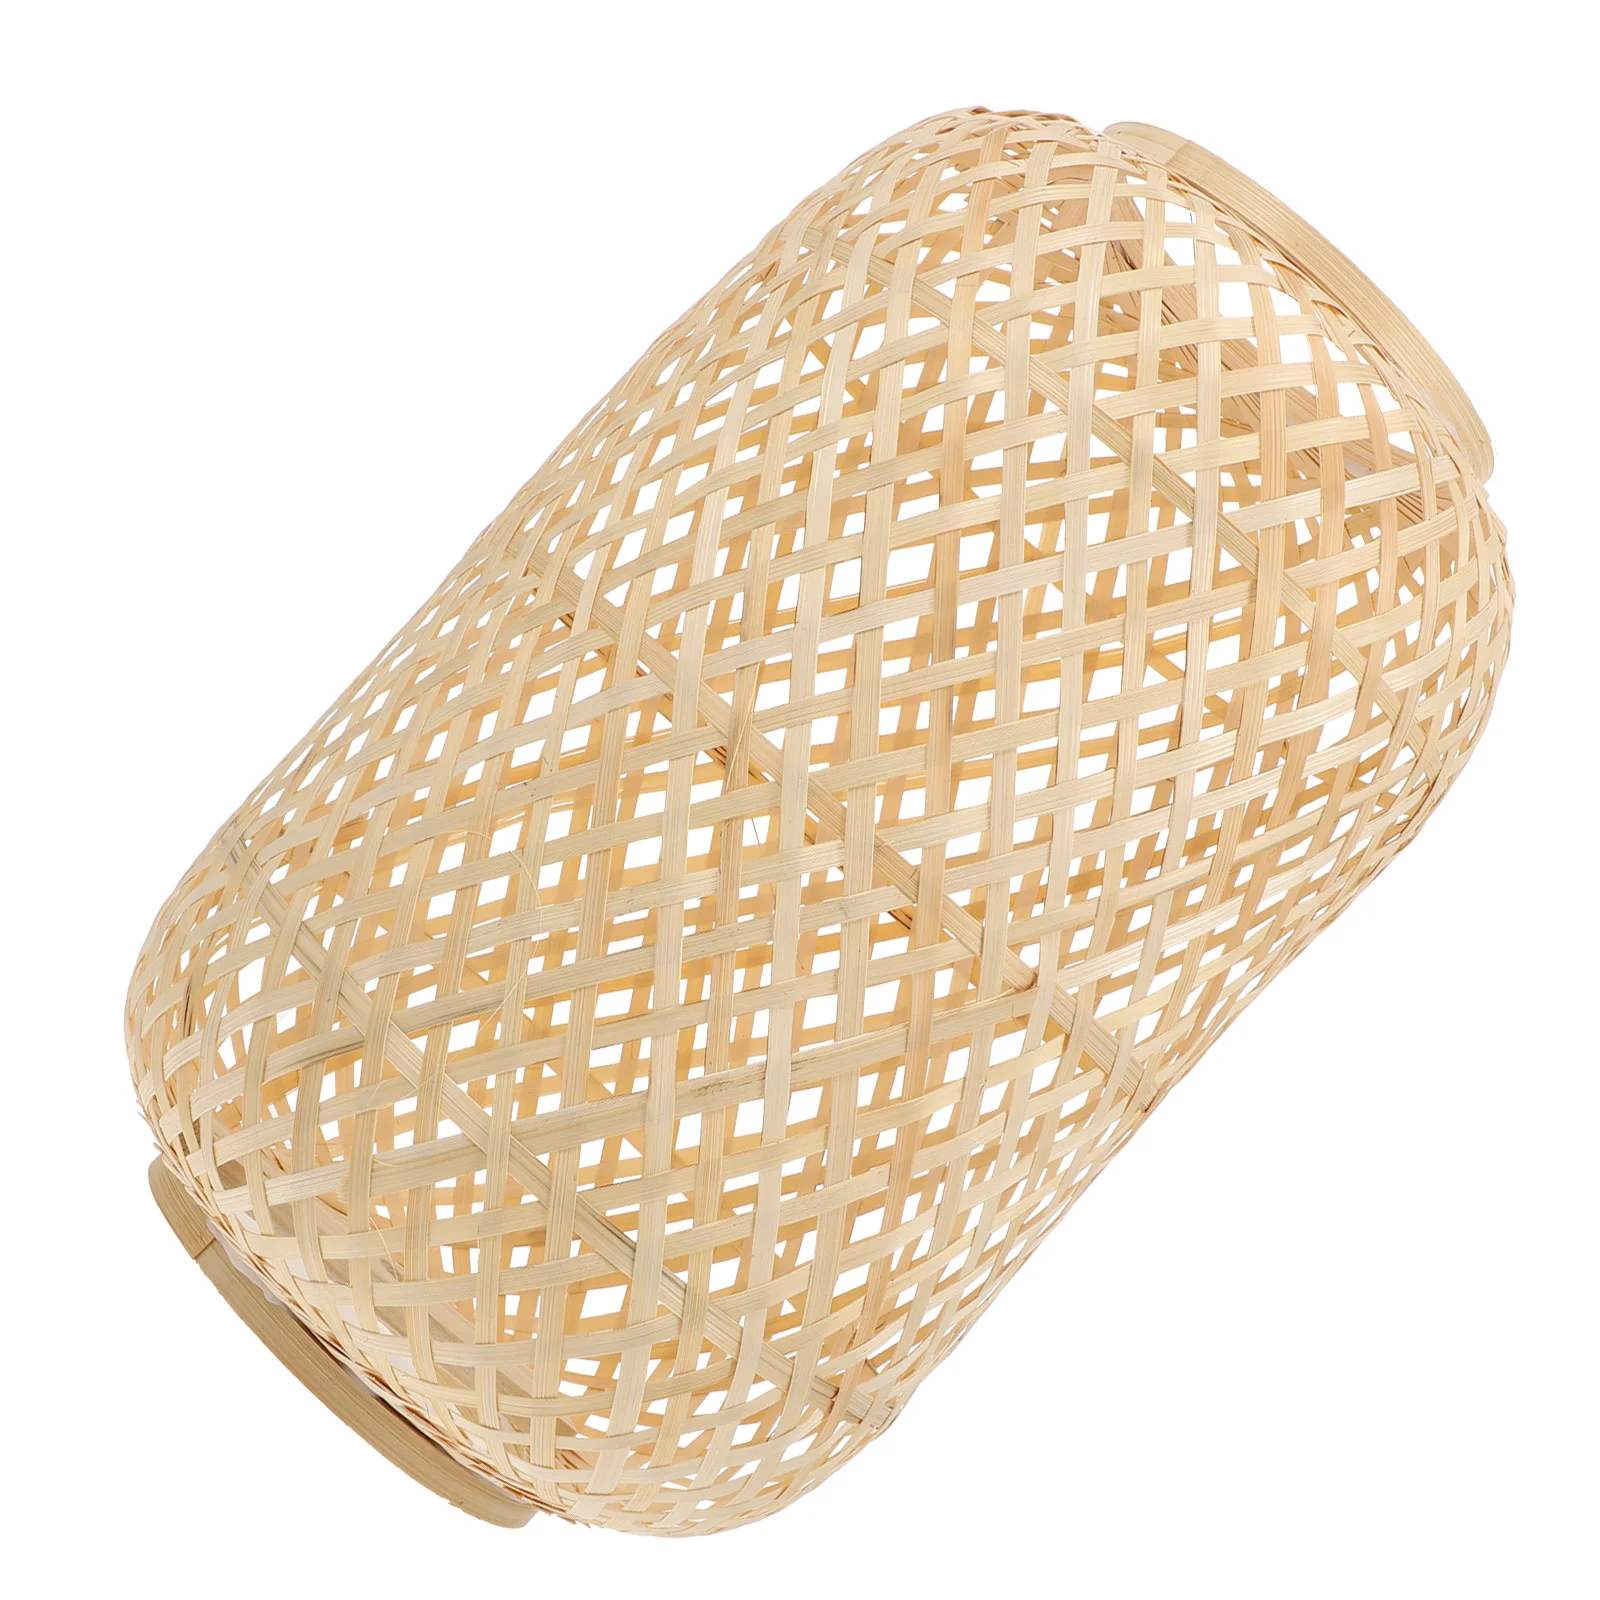 

Bamboo Woven Lampshade Hand Woven Bamboo Art Weaving Craft Lampshade Rustic Ceiling Light Cover Natural Light Shell Khaki